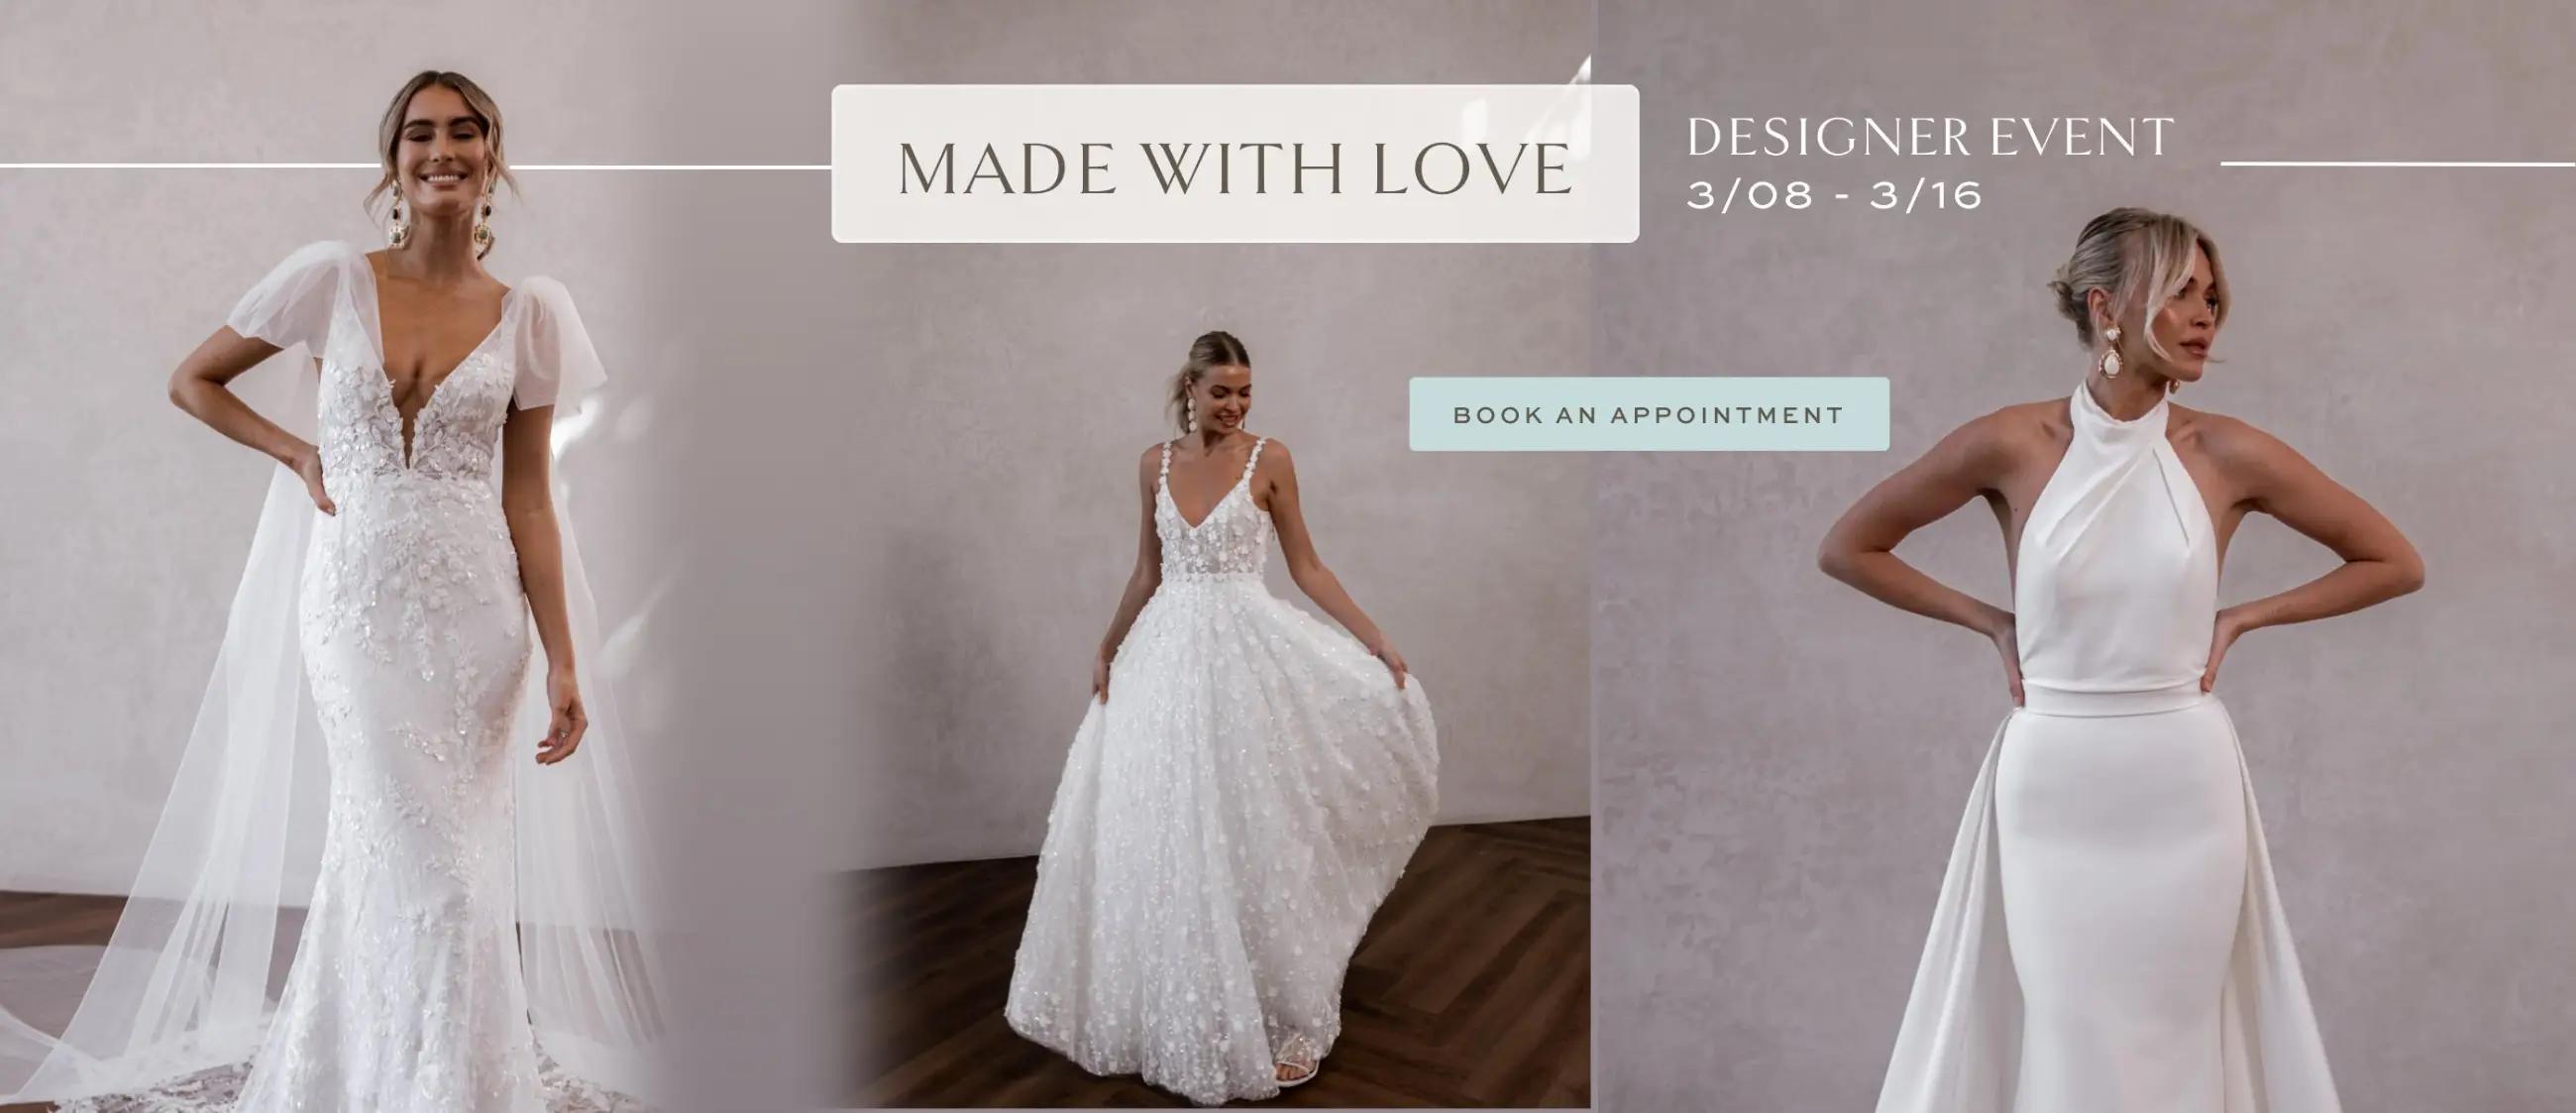 Made with love designer event at belle amour bridal